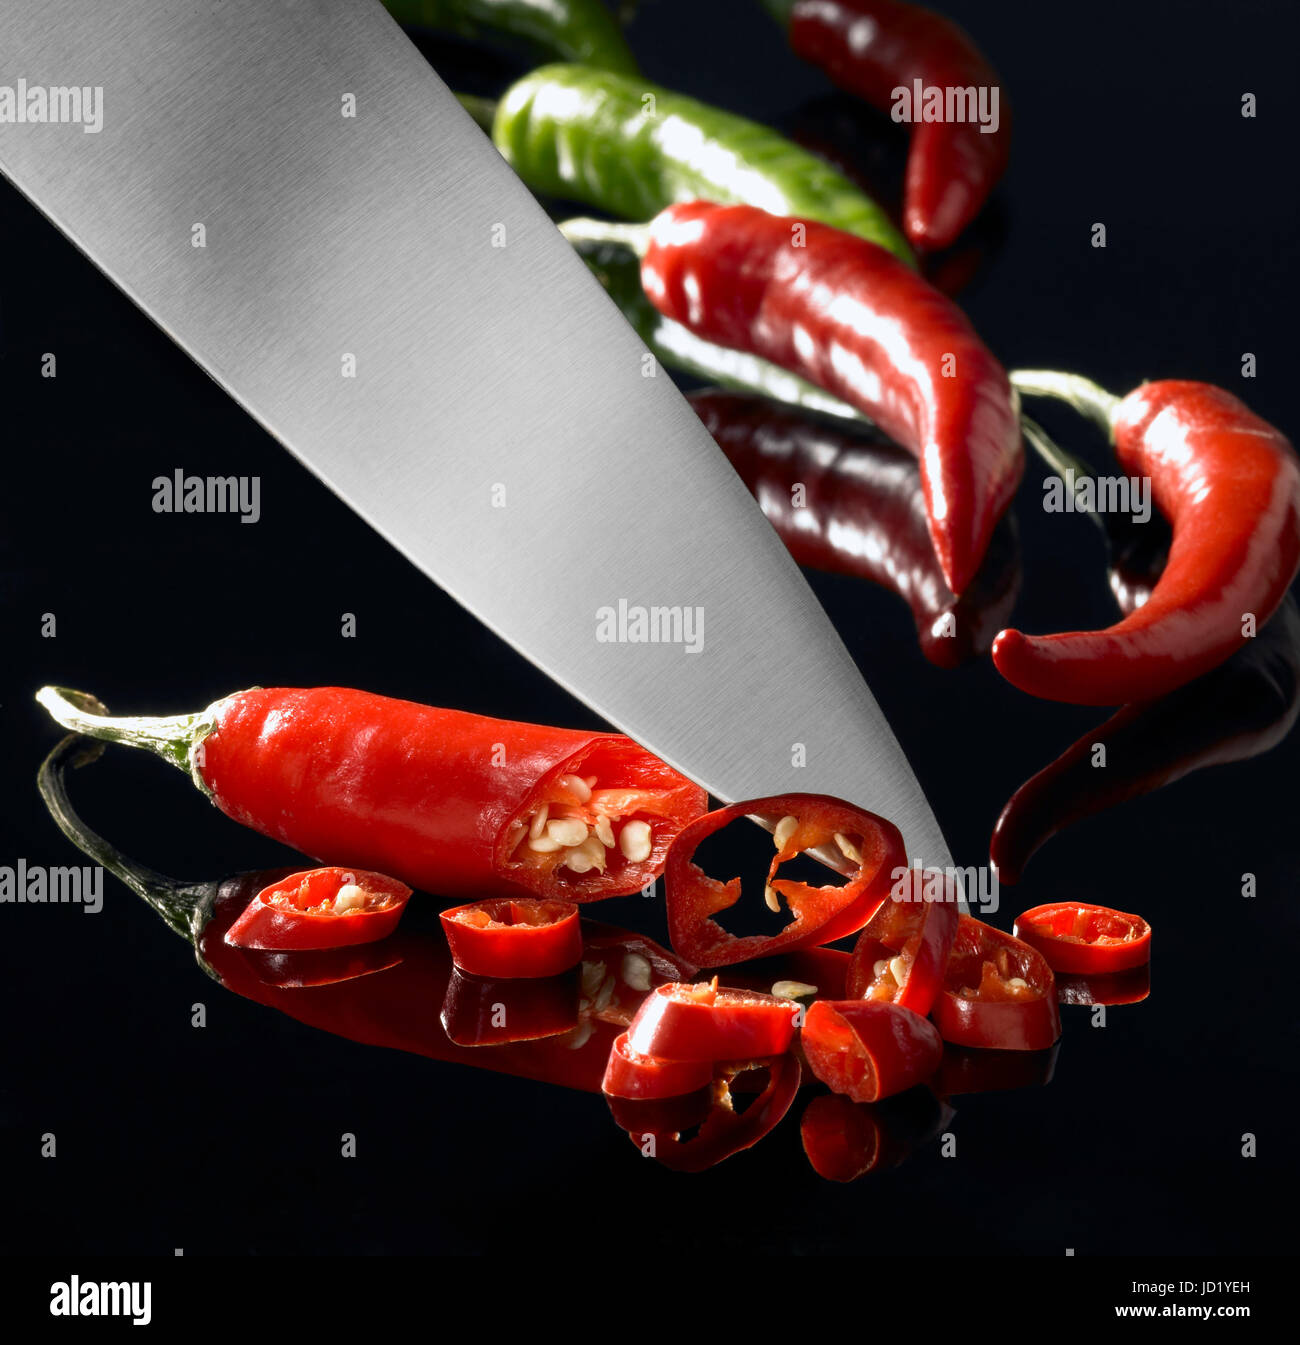 spice, paprika, peppers, chilli, chili, arm, weapon, knive, knife, food, Stock Photo